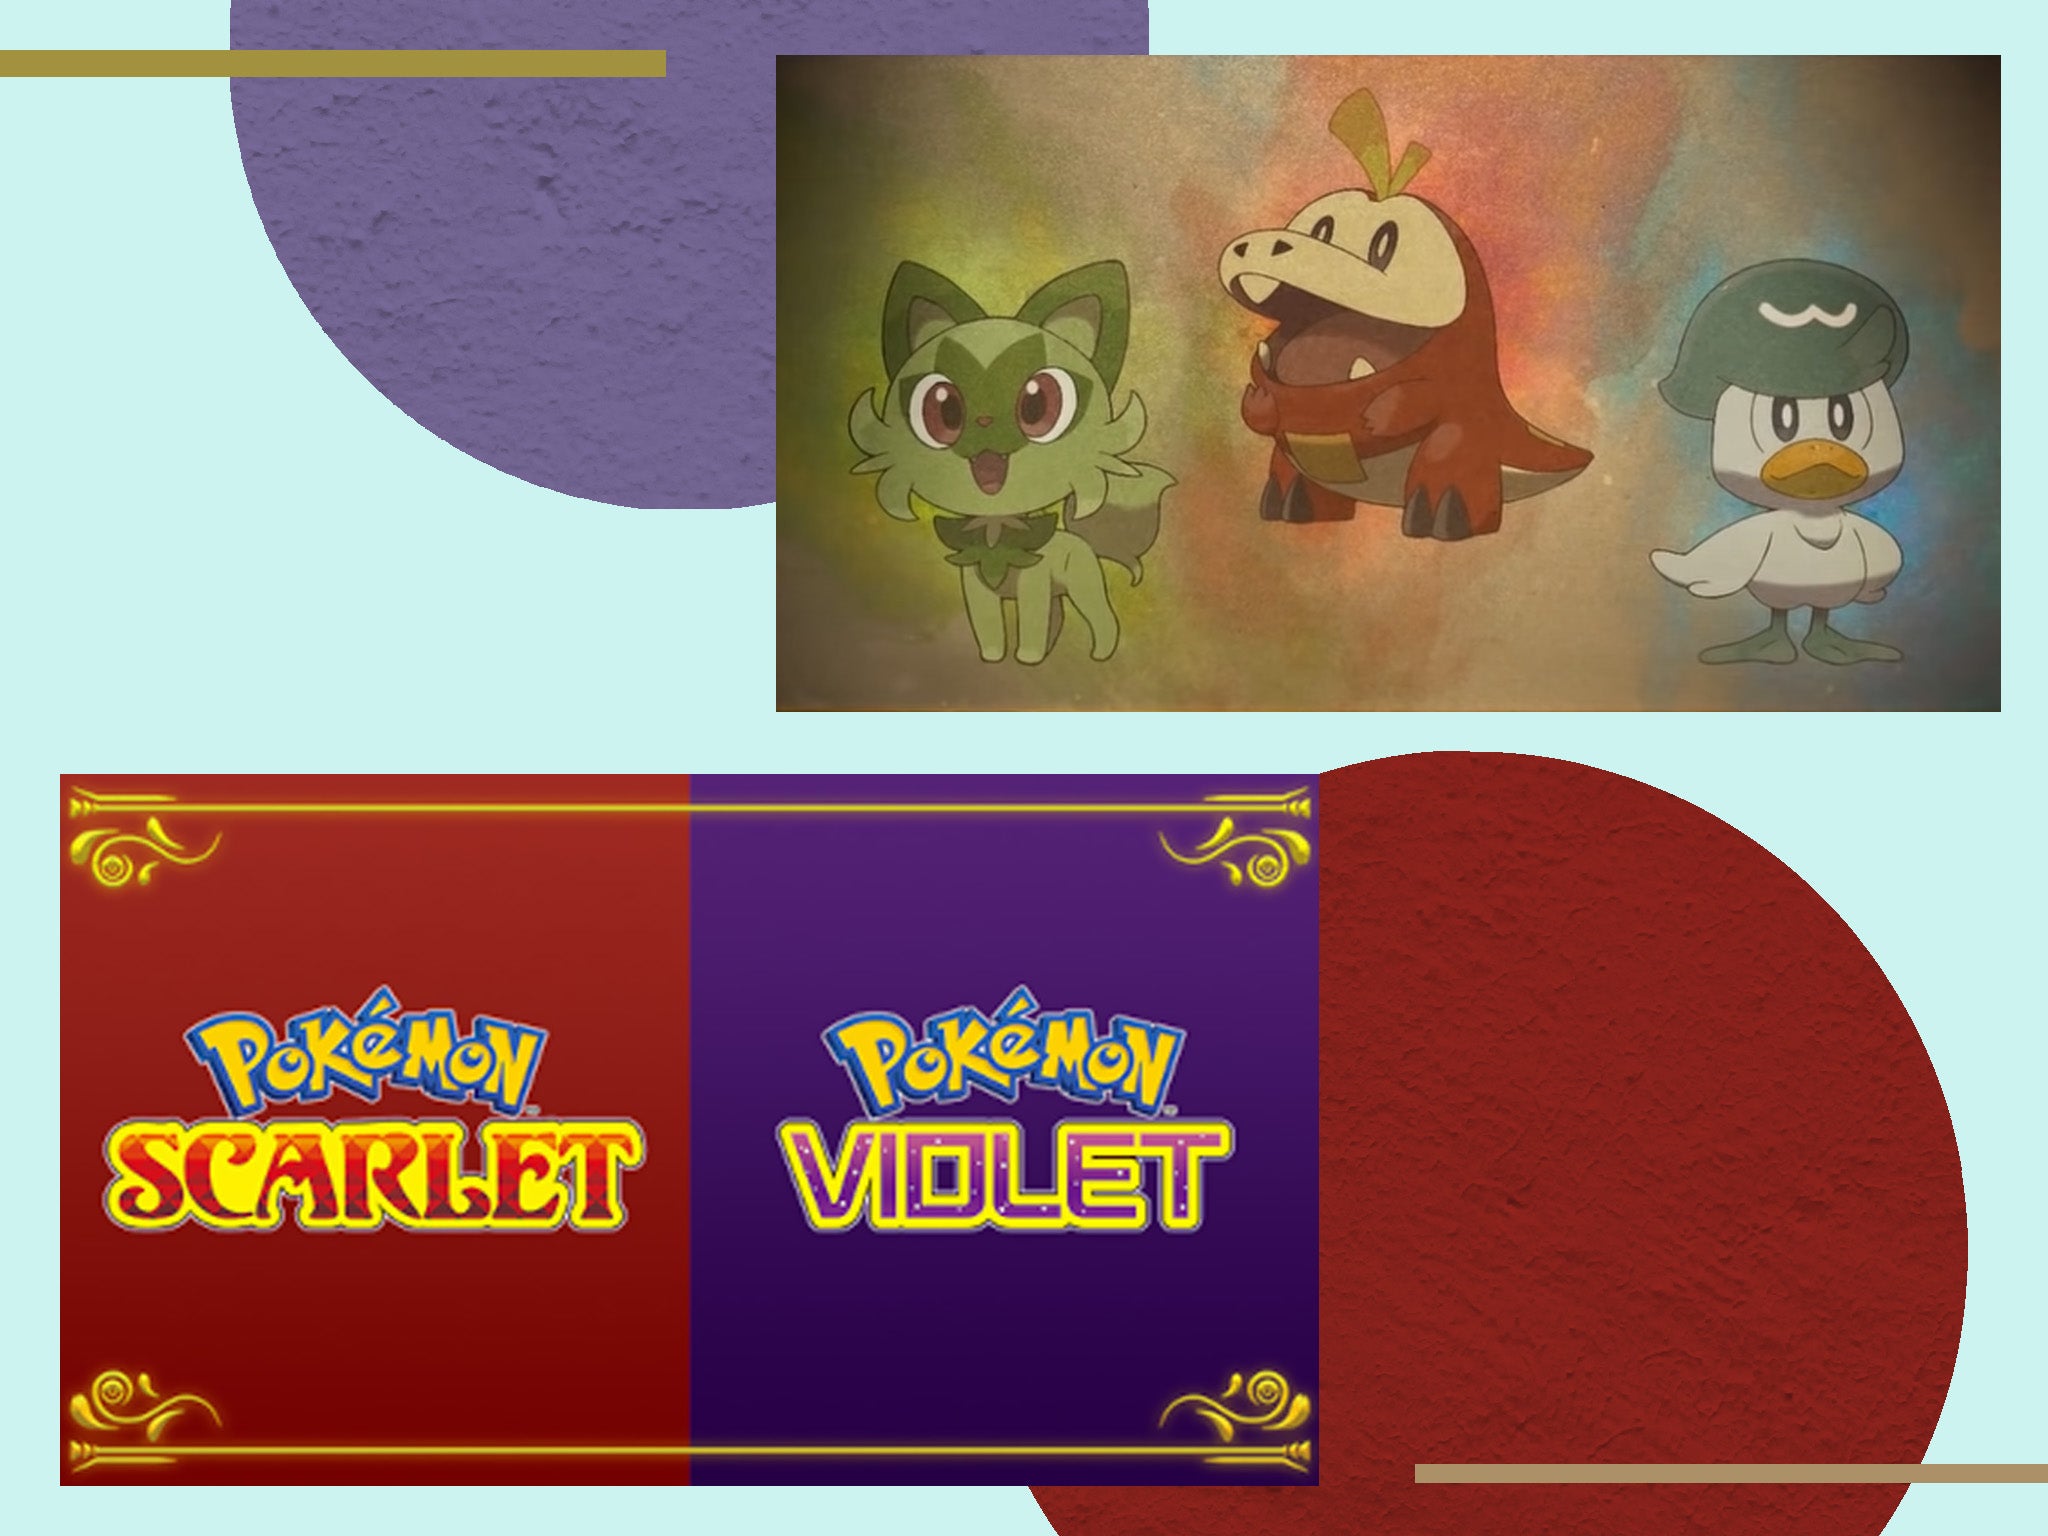 Pokémon Scarlet and Violet Release date, new starters and what to